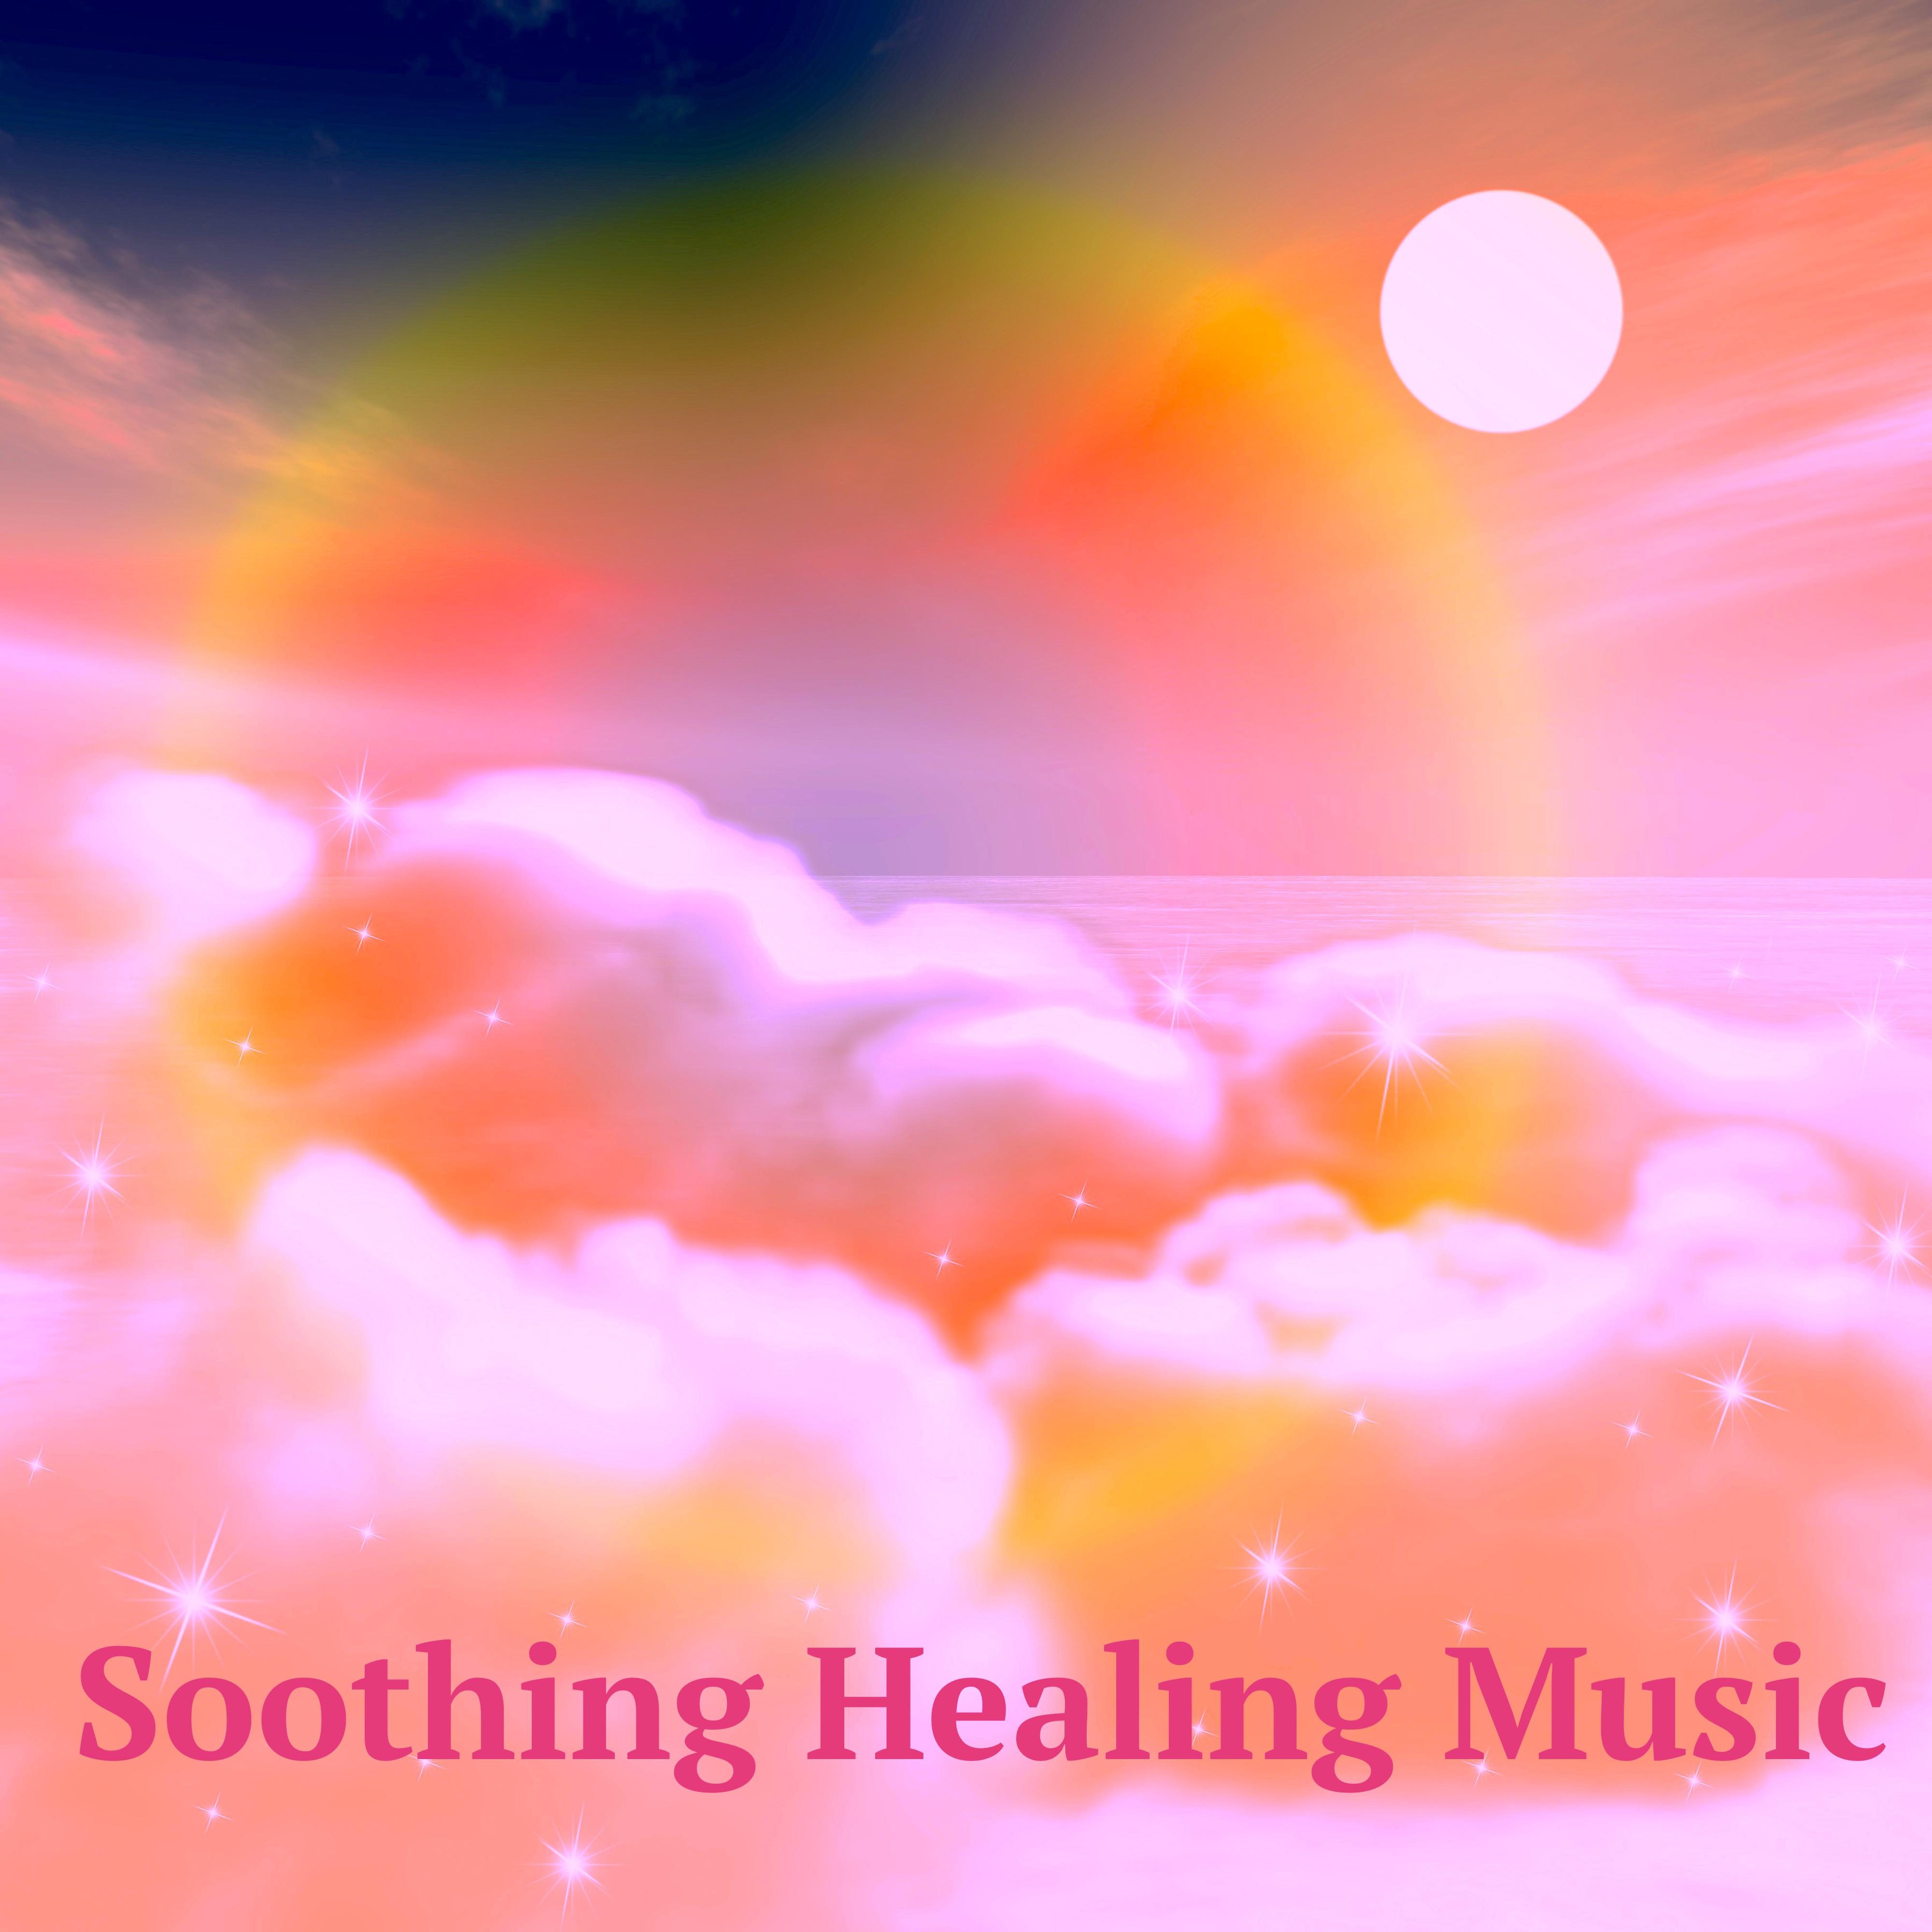 Soothing Healing Music  Piano Music and Sounds of Nature for Deep Relaxation, Relaxing Mind  Meditation